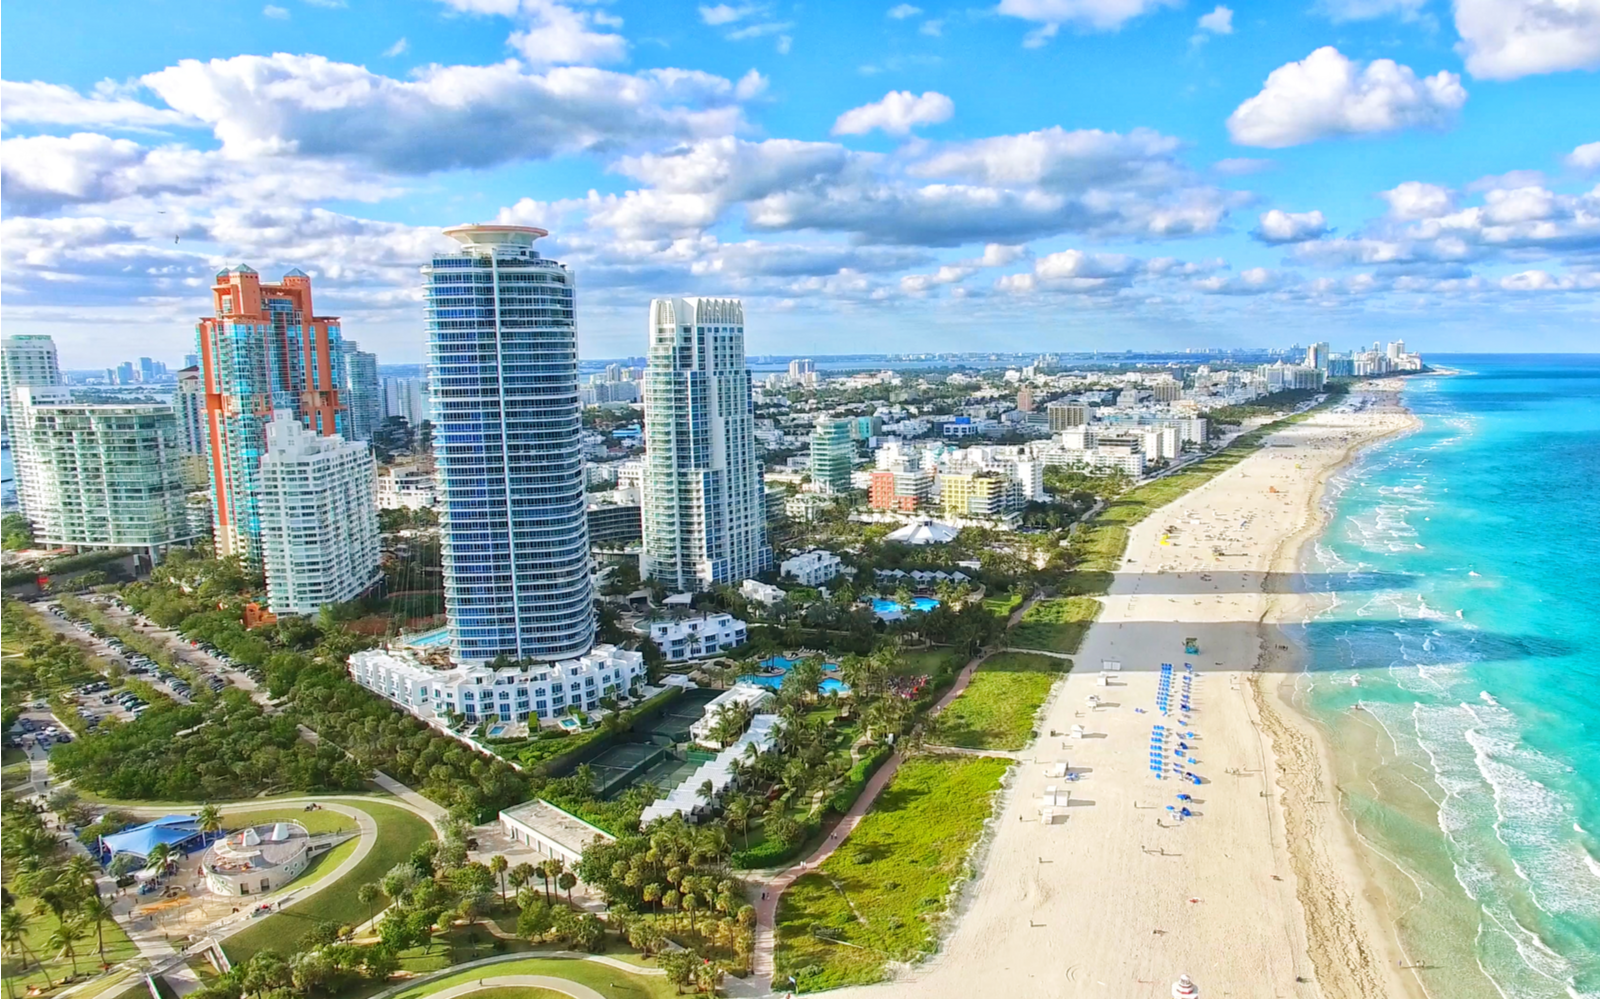 The Best Time to Visit Miami in 2023